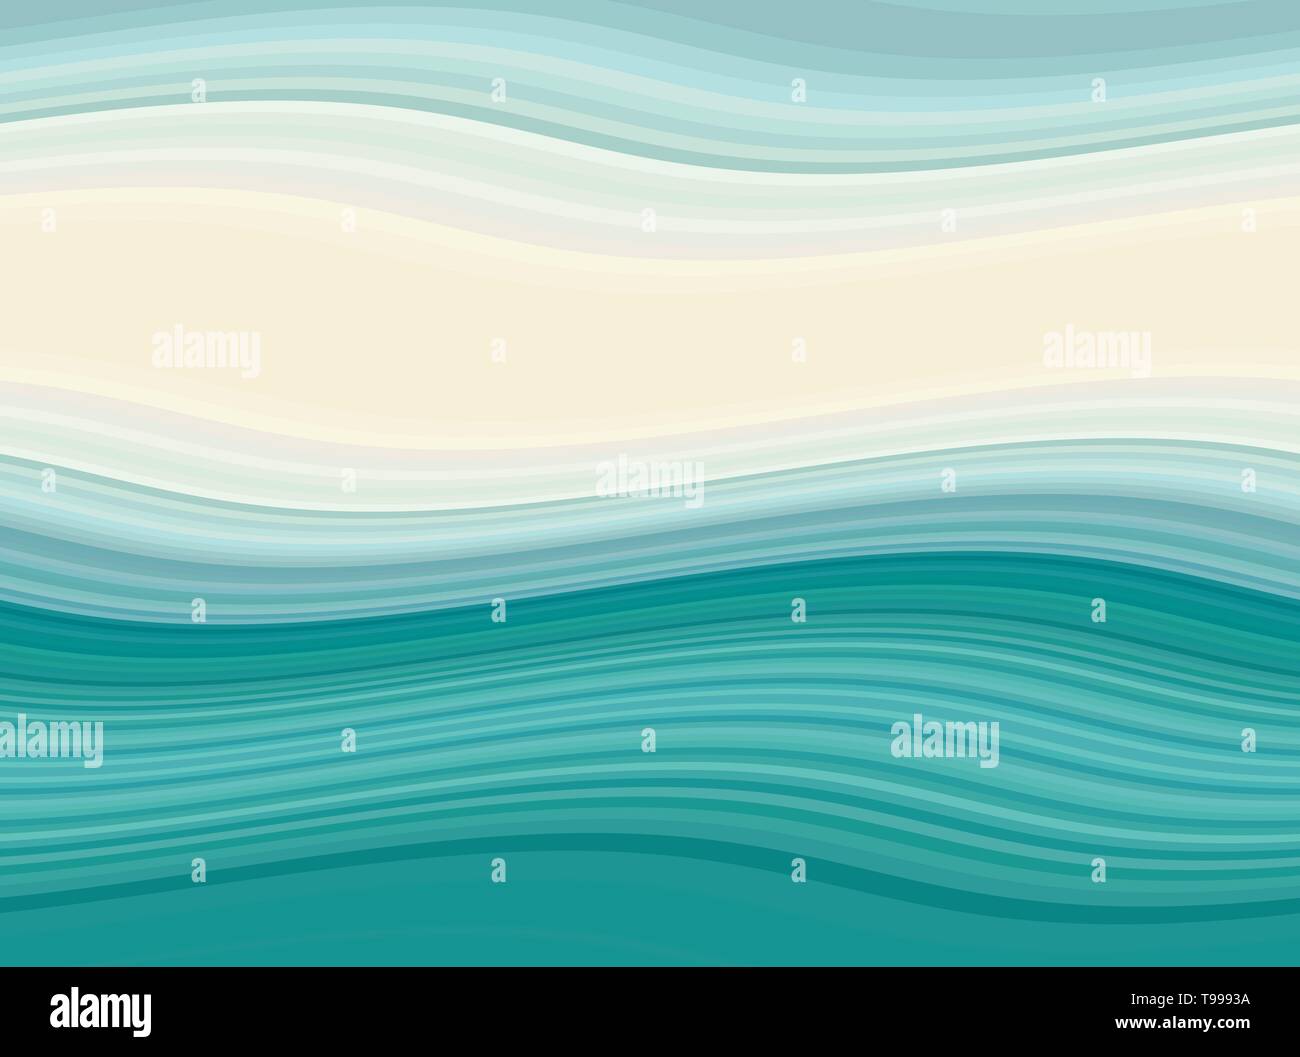 abstract waves background with light sea green, medium aqua marine and  beige color. waves can be used for wallpaper, presentation, graphic  illustratio Stock Photo - Alamy